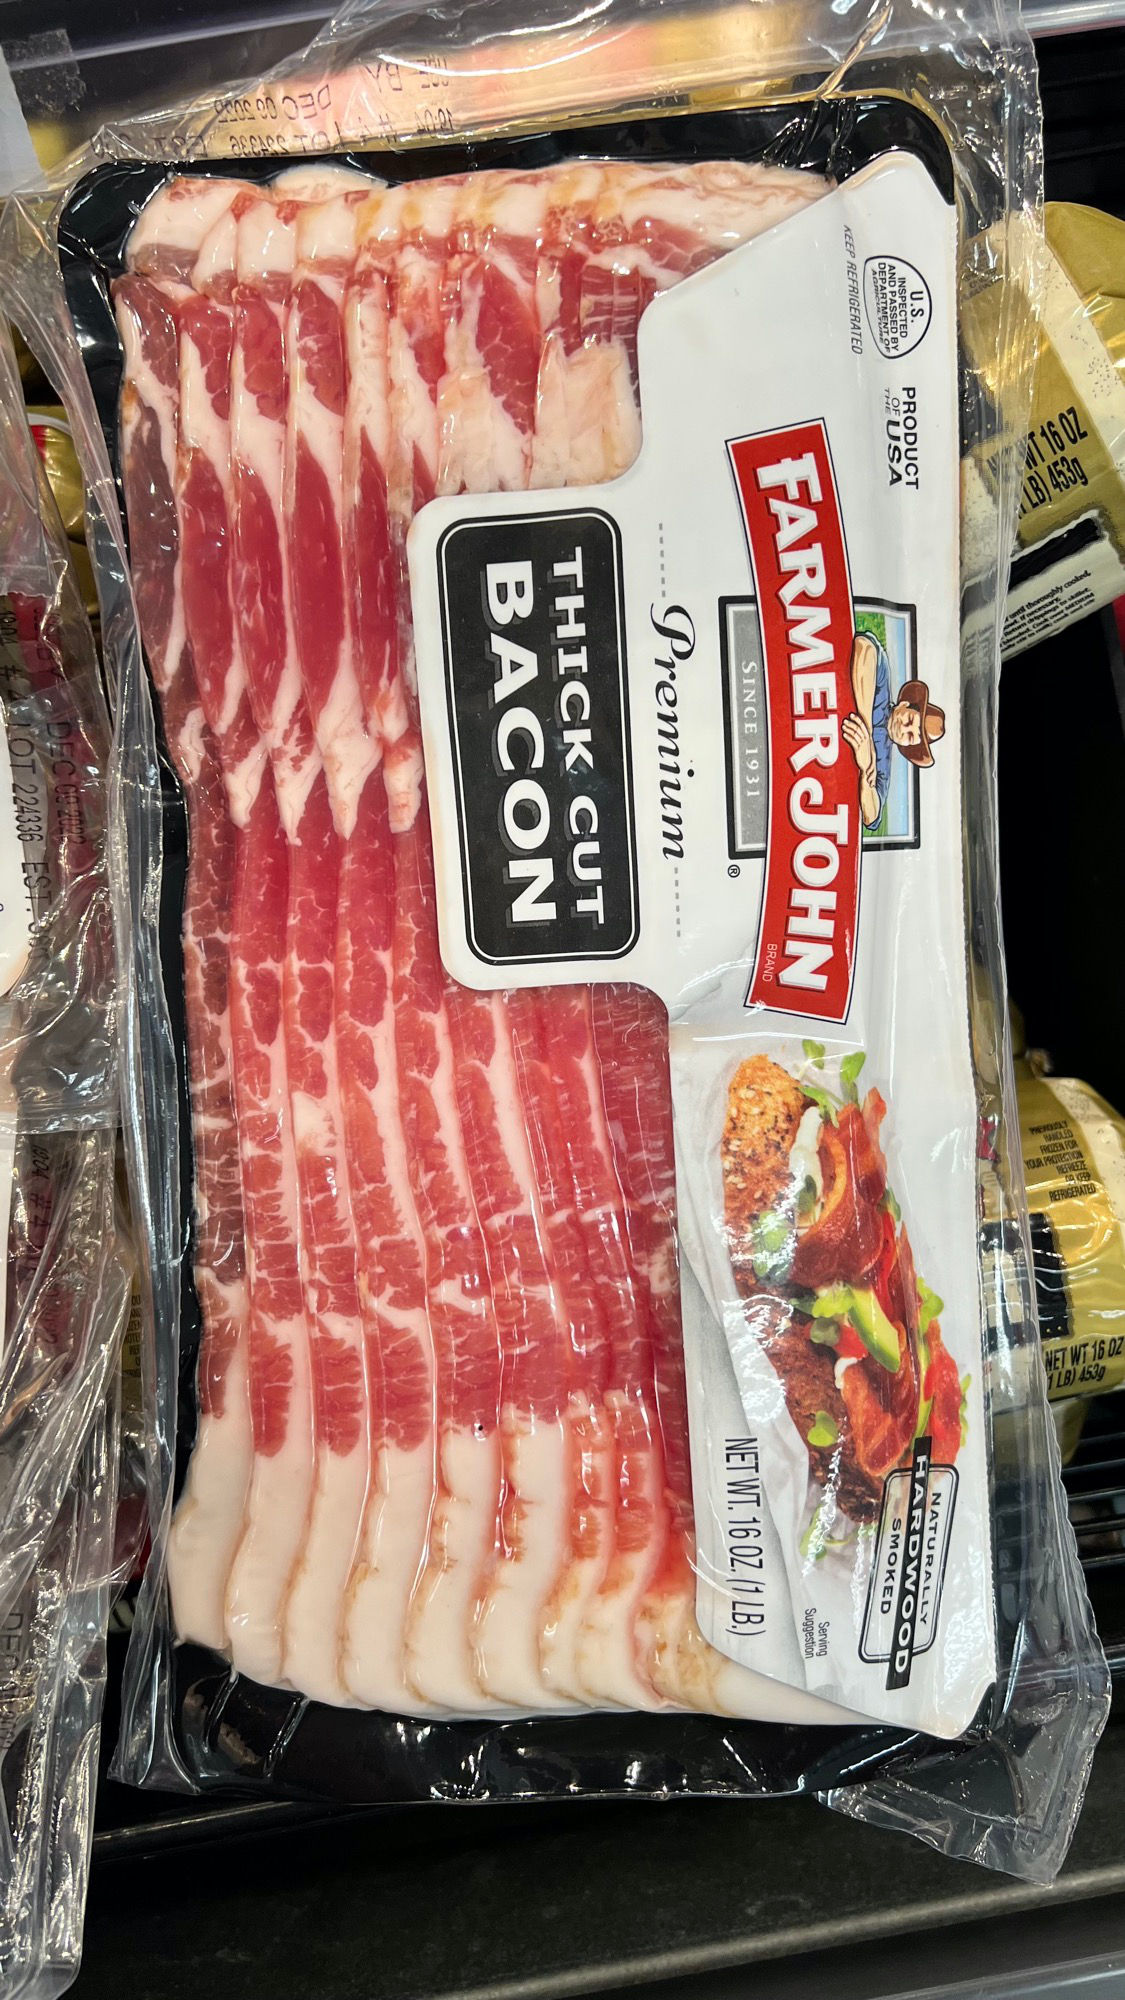 Bacon How to Choose front